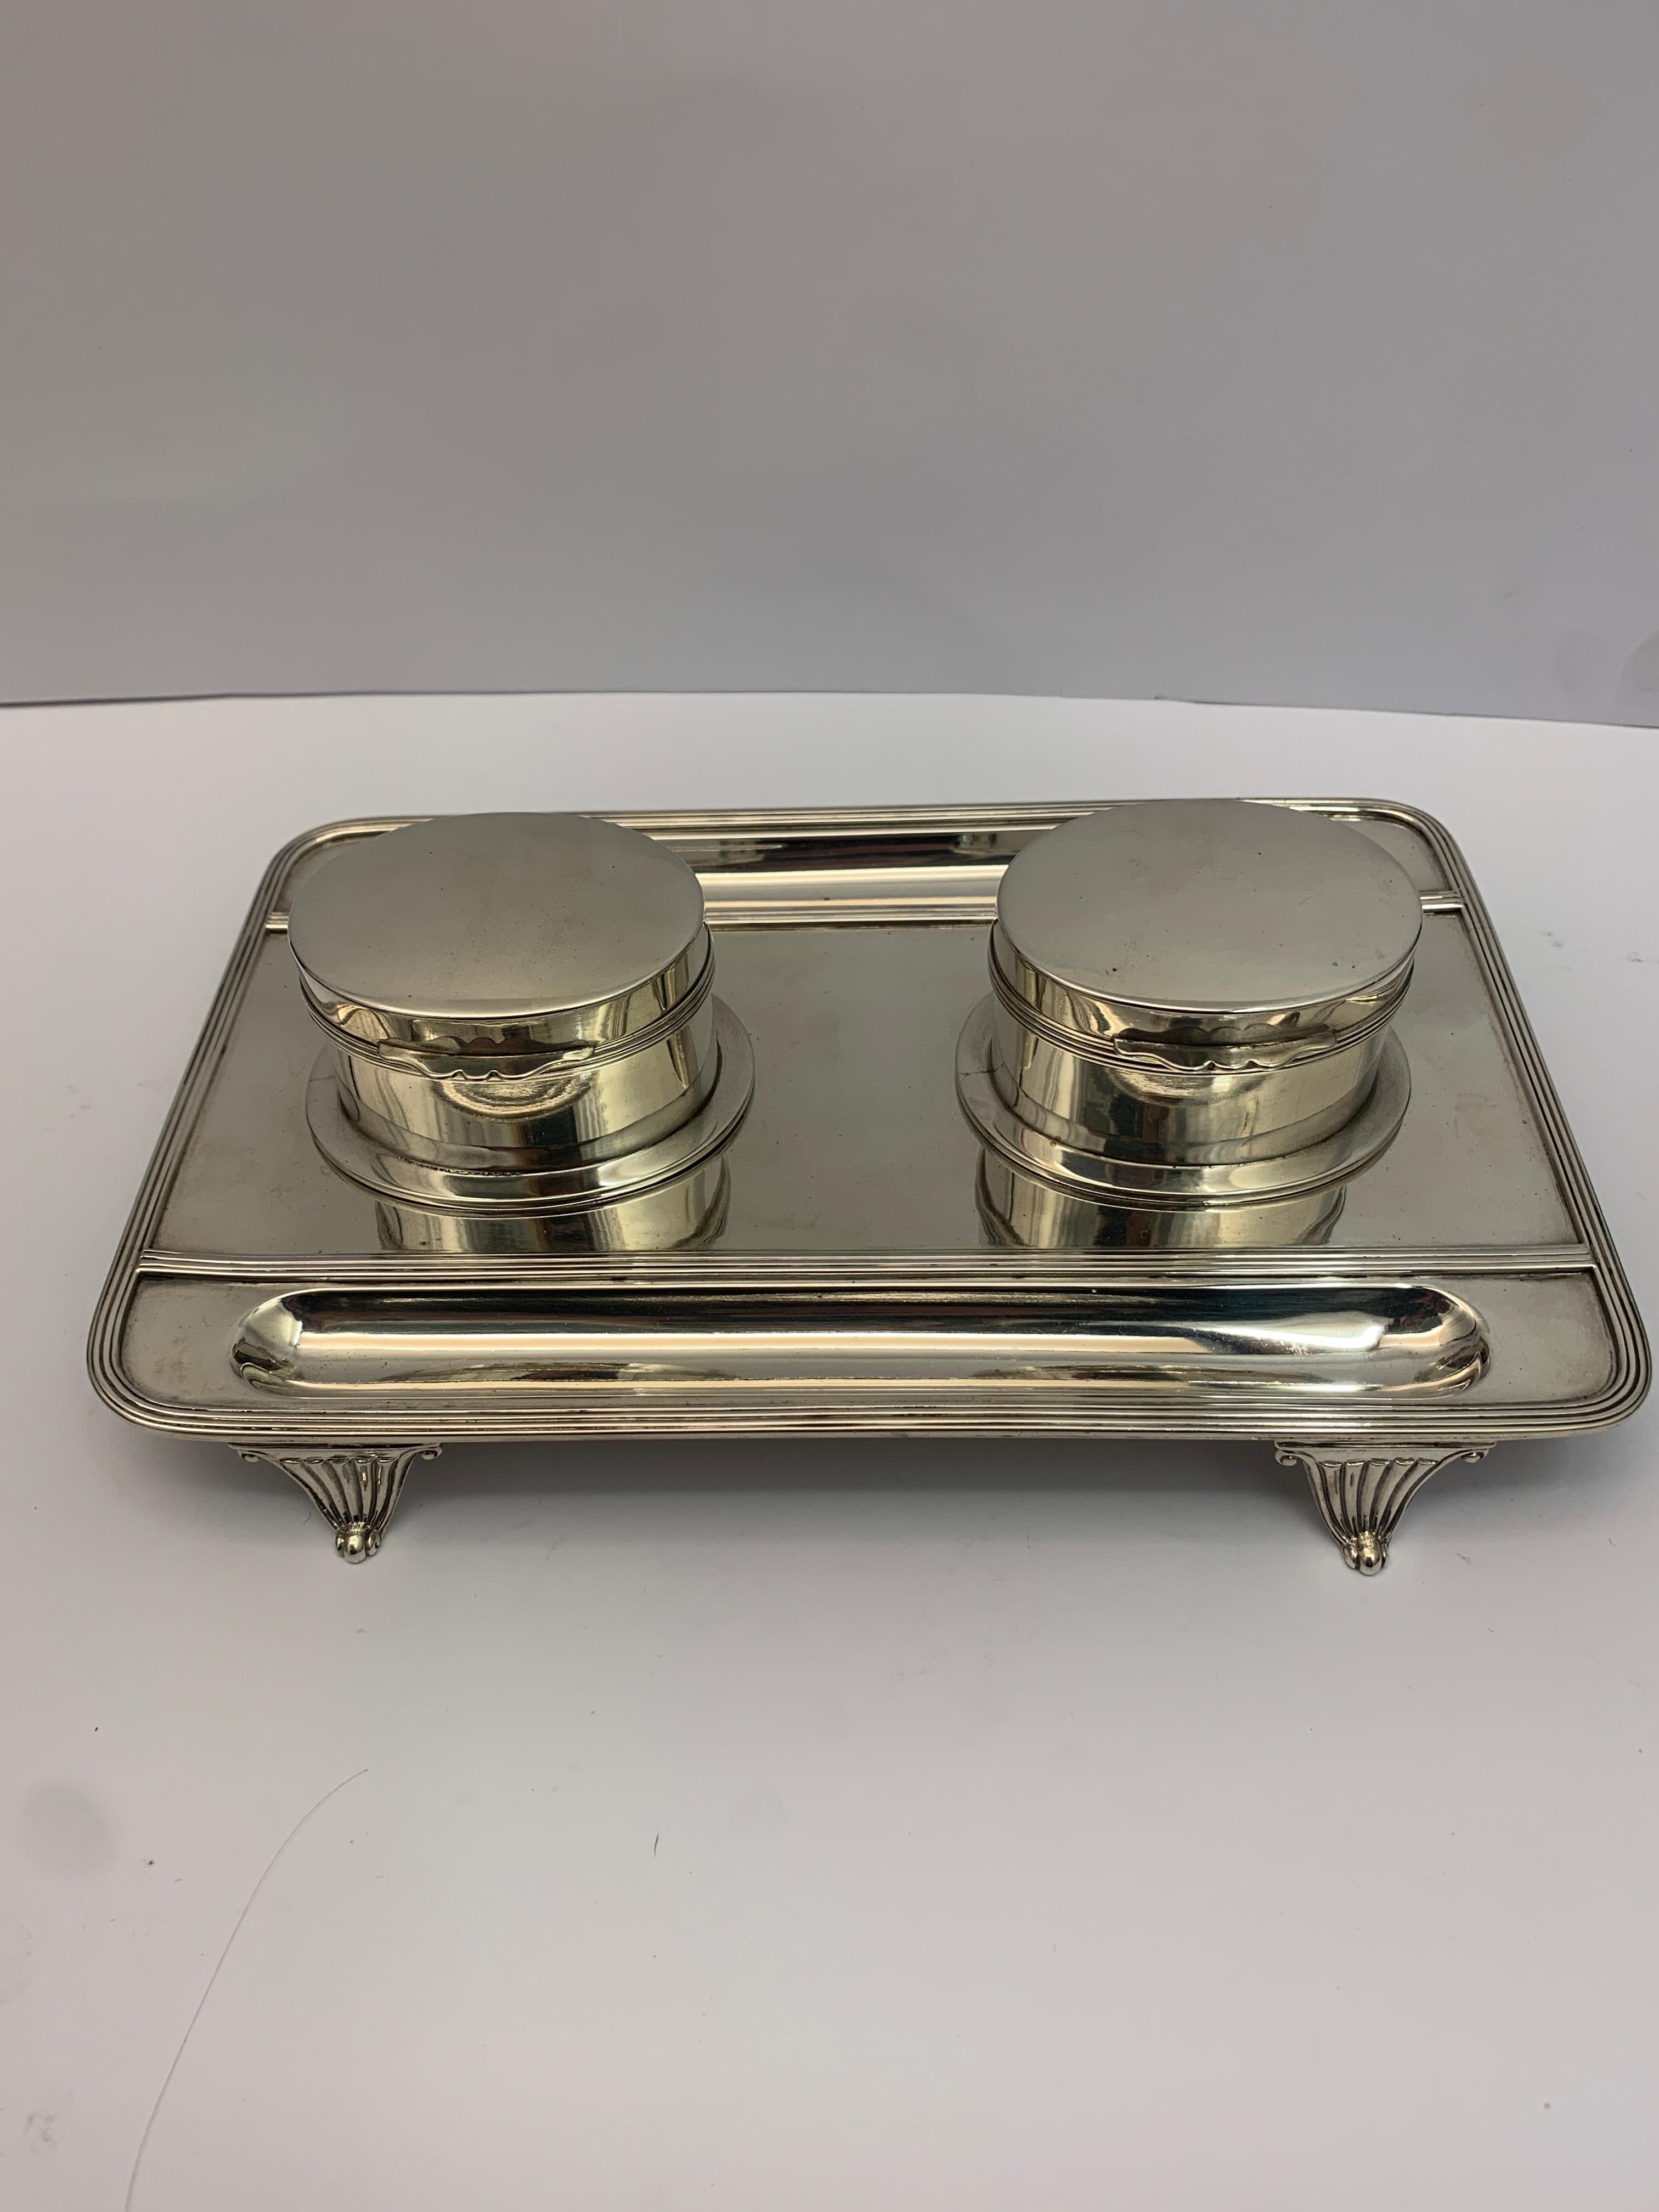 A double silver lidded inkwell on silver tray with 4 small decorative feet. Made in 1892.